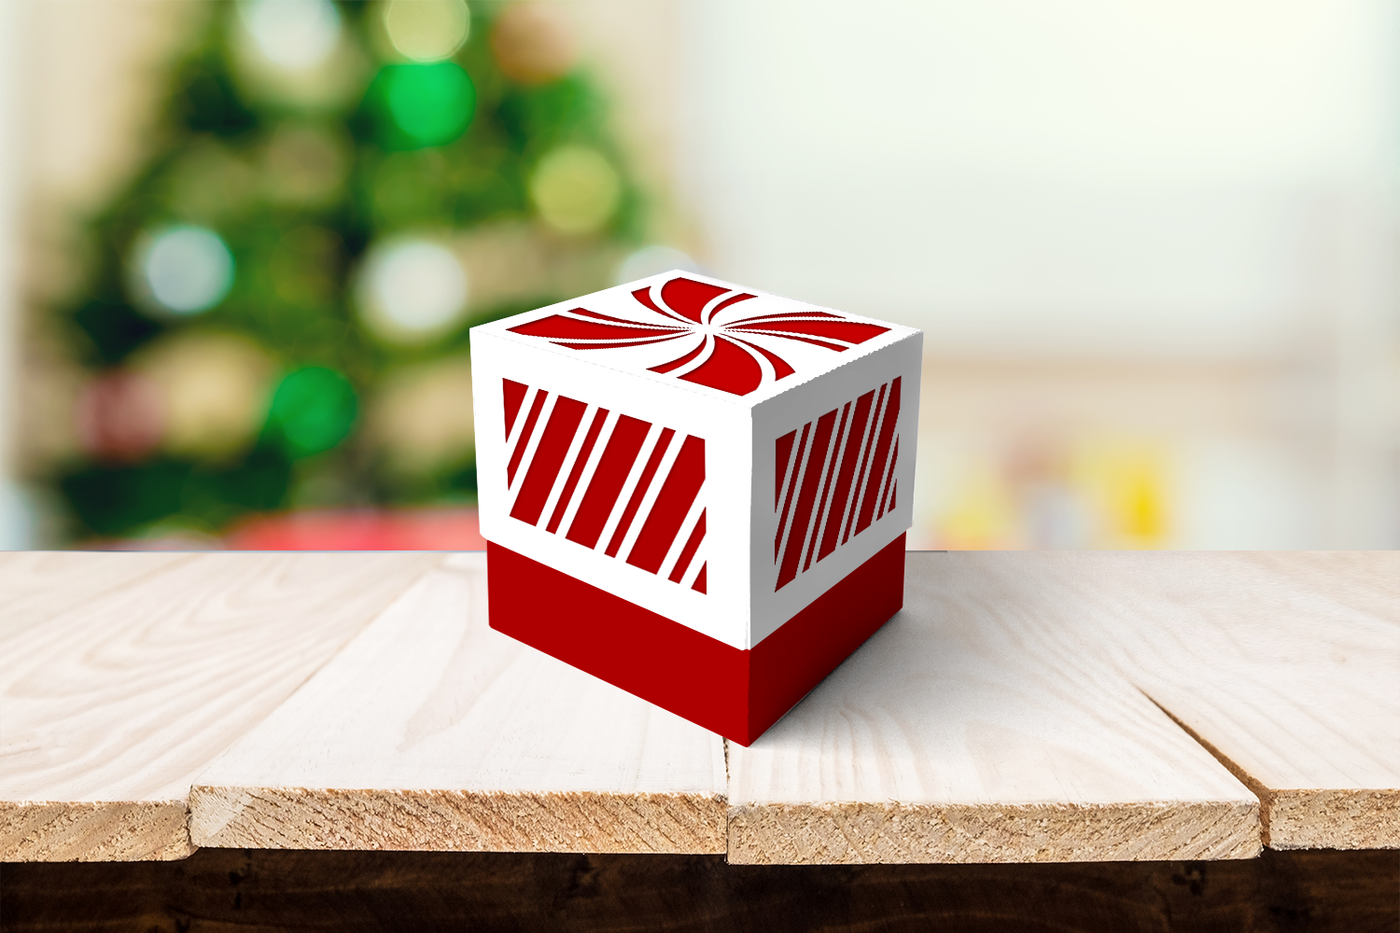 Cube shaped gift box with candy cane stripe cutouts on the lid.